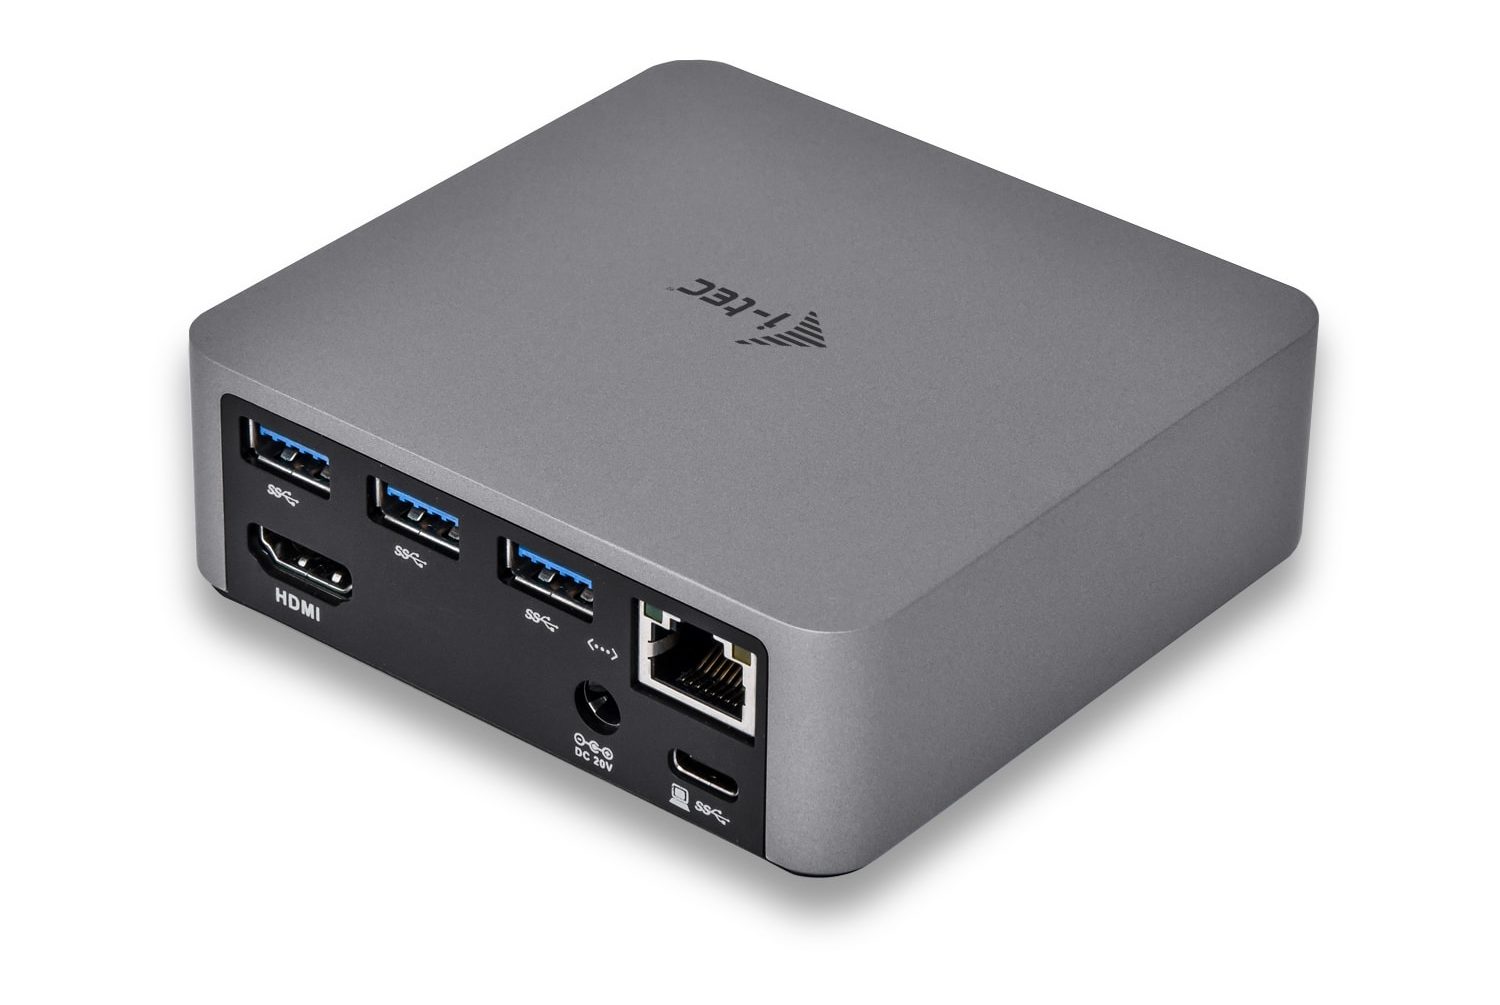 Many USB-C hubs, like this one from i-tec, offer an Ethernet port.